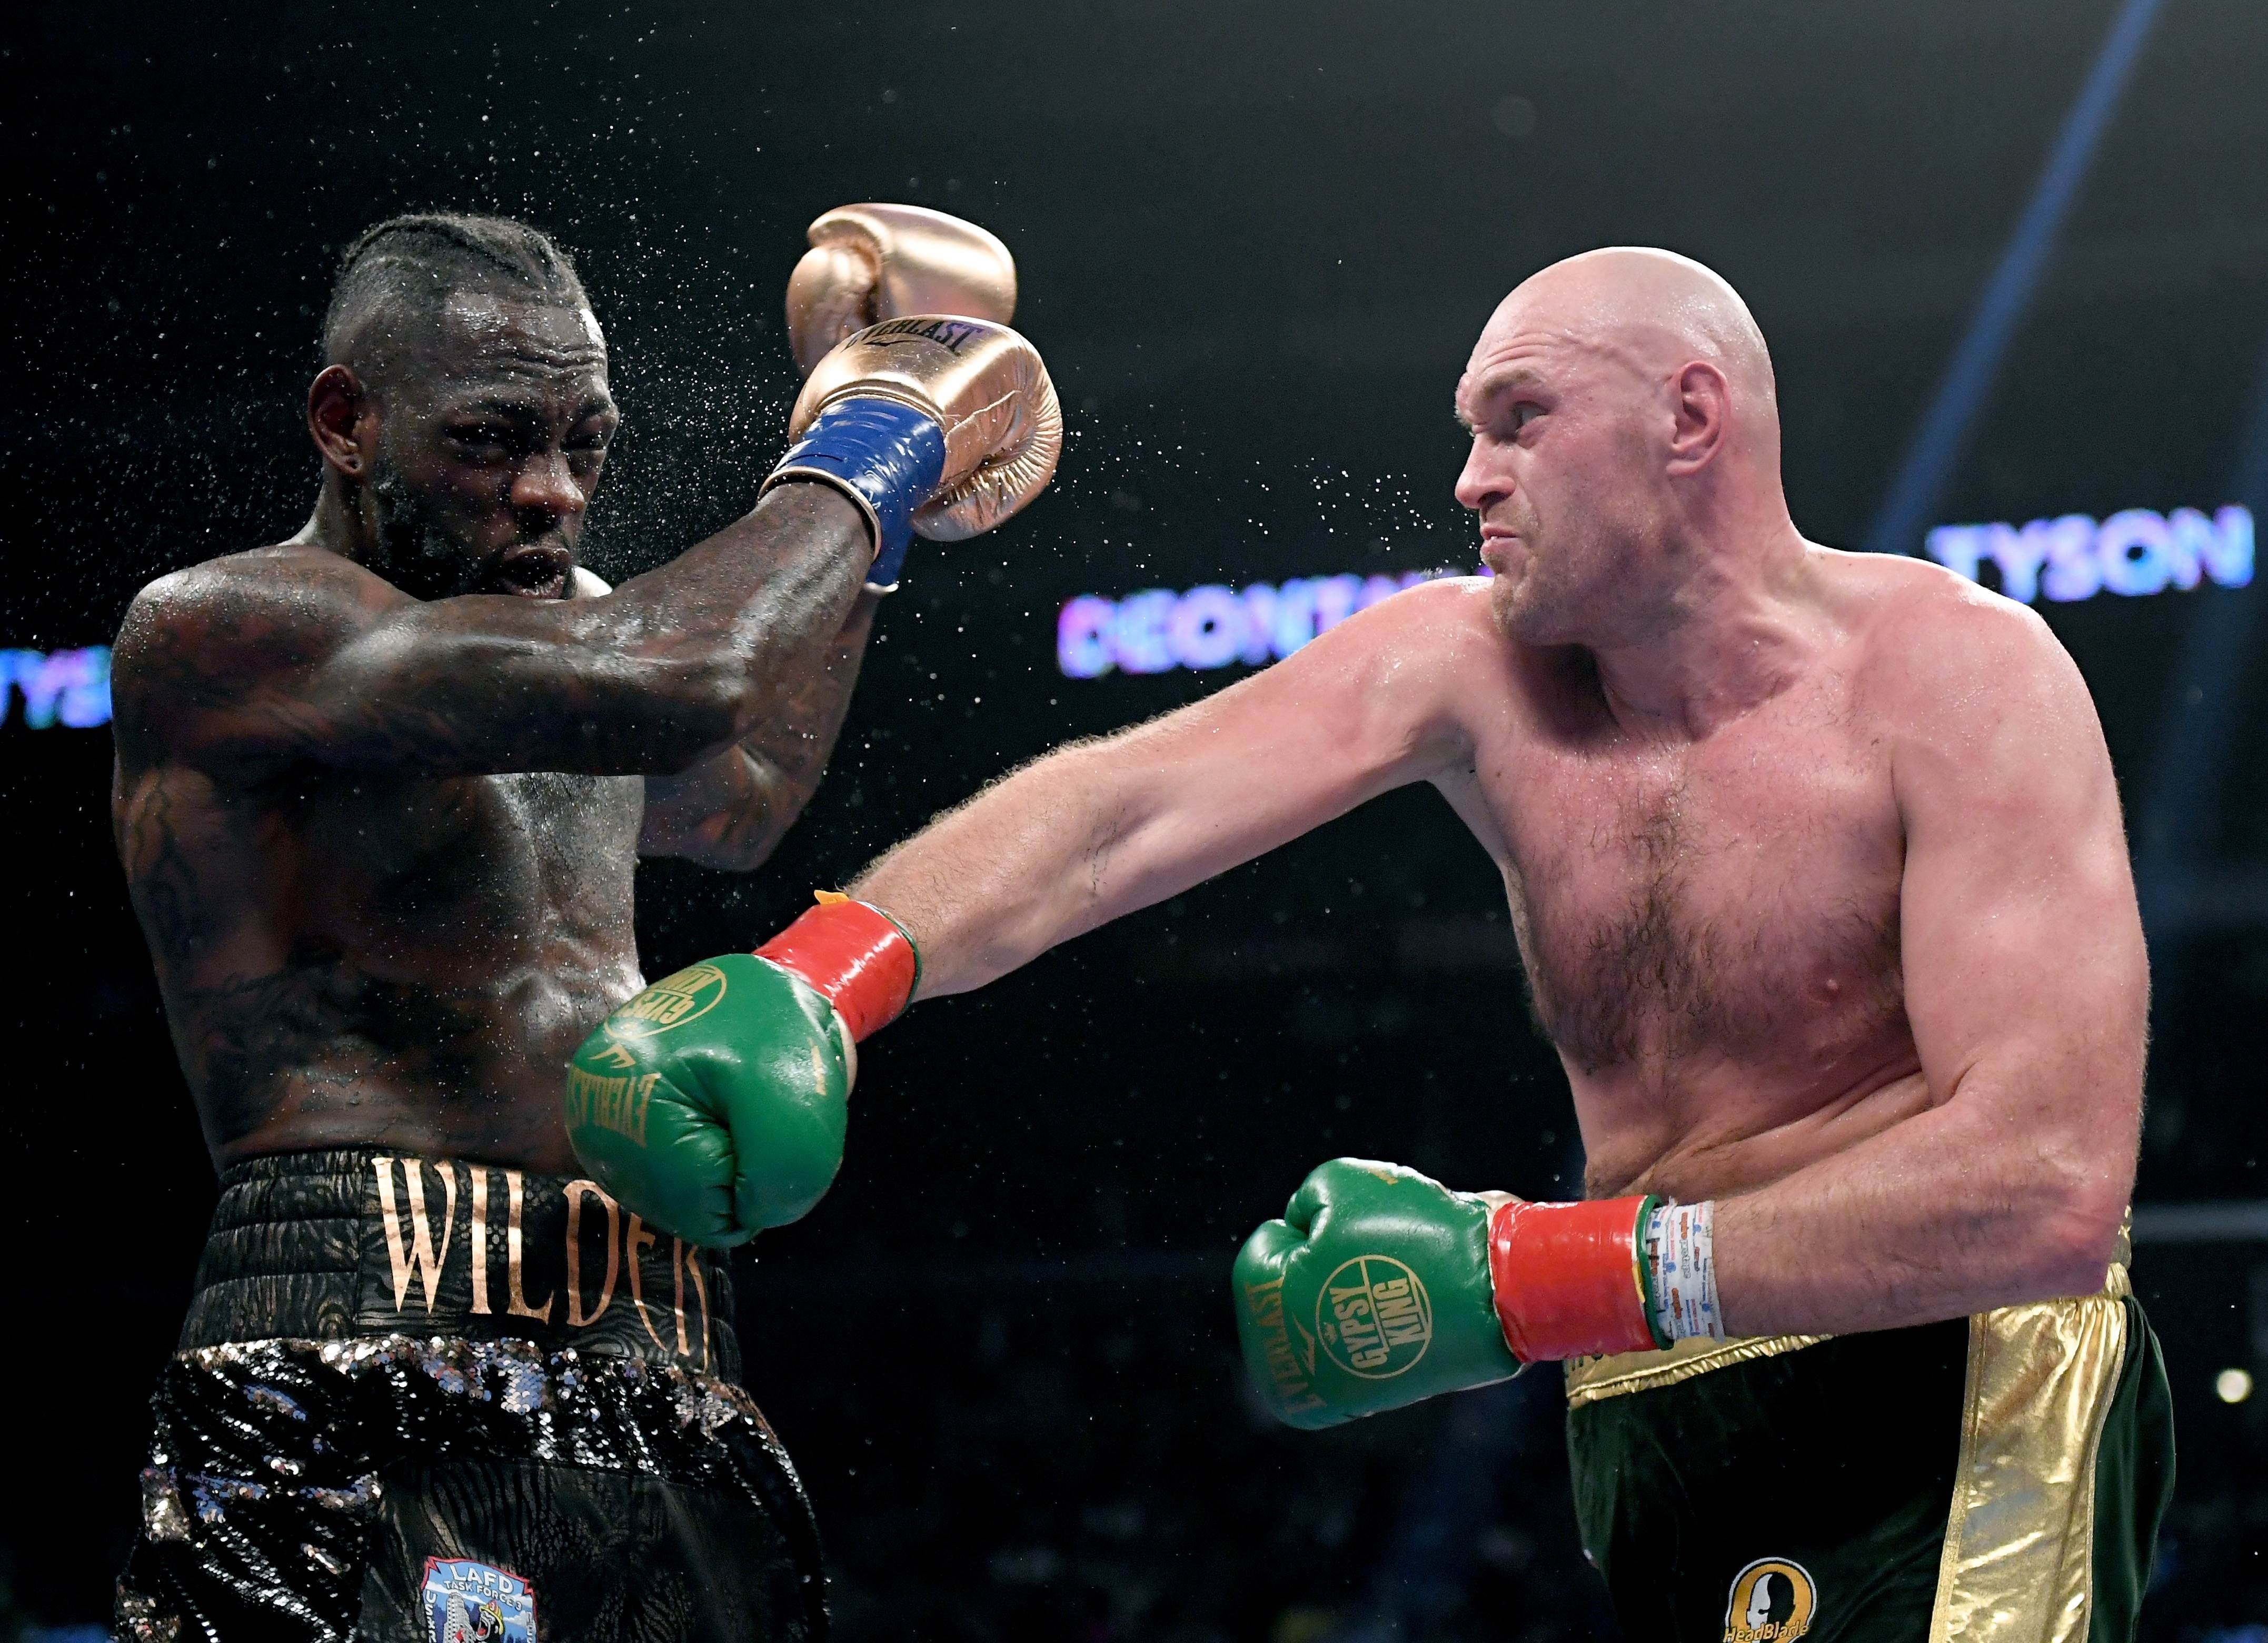 Tyson Fury throws a right hand against Deontay Wilder in the seventh round of their fight that ended in a controversial draw. Photo: AFP